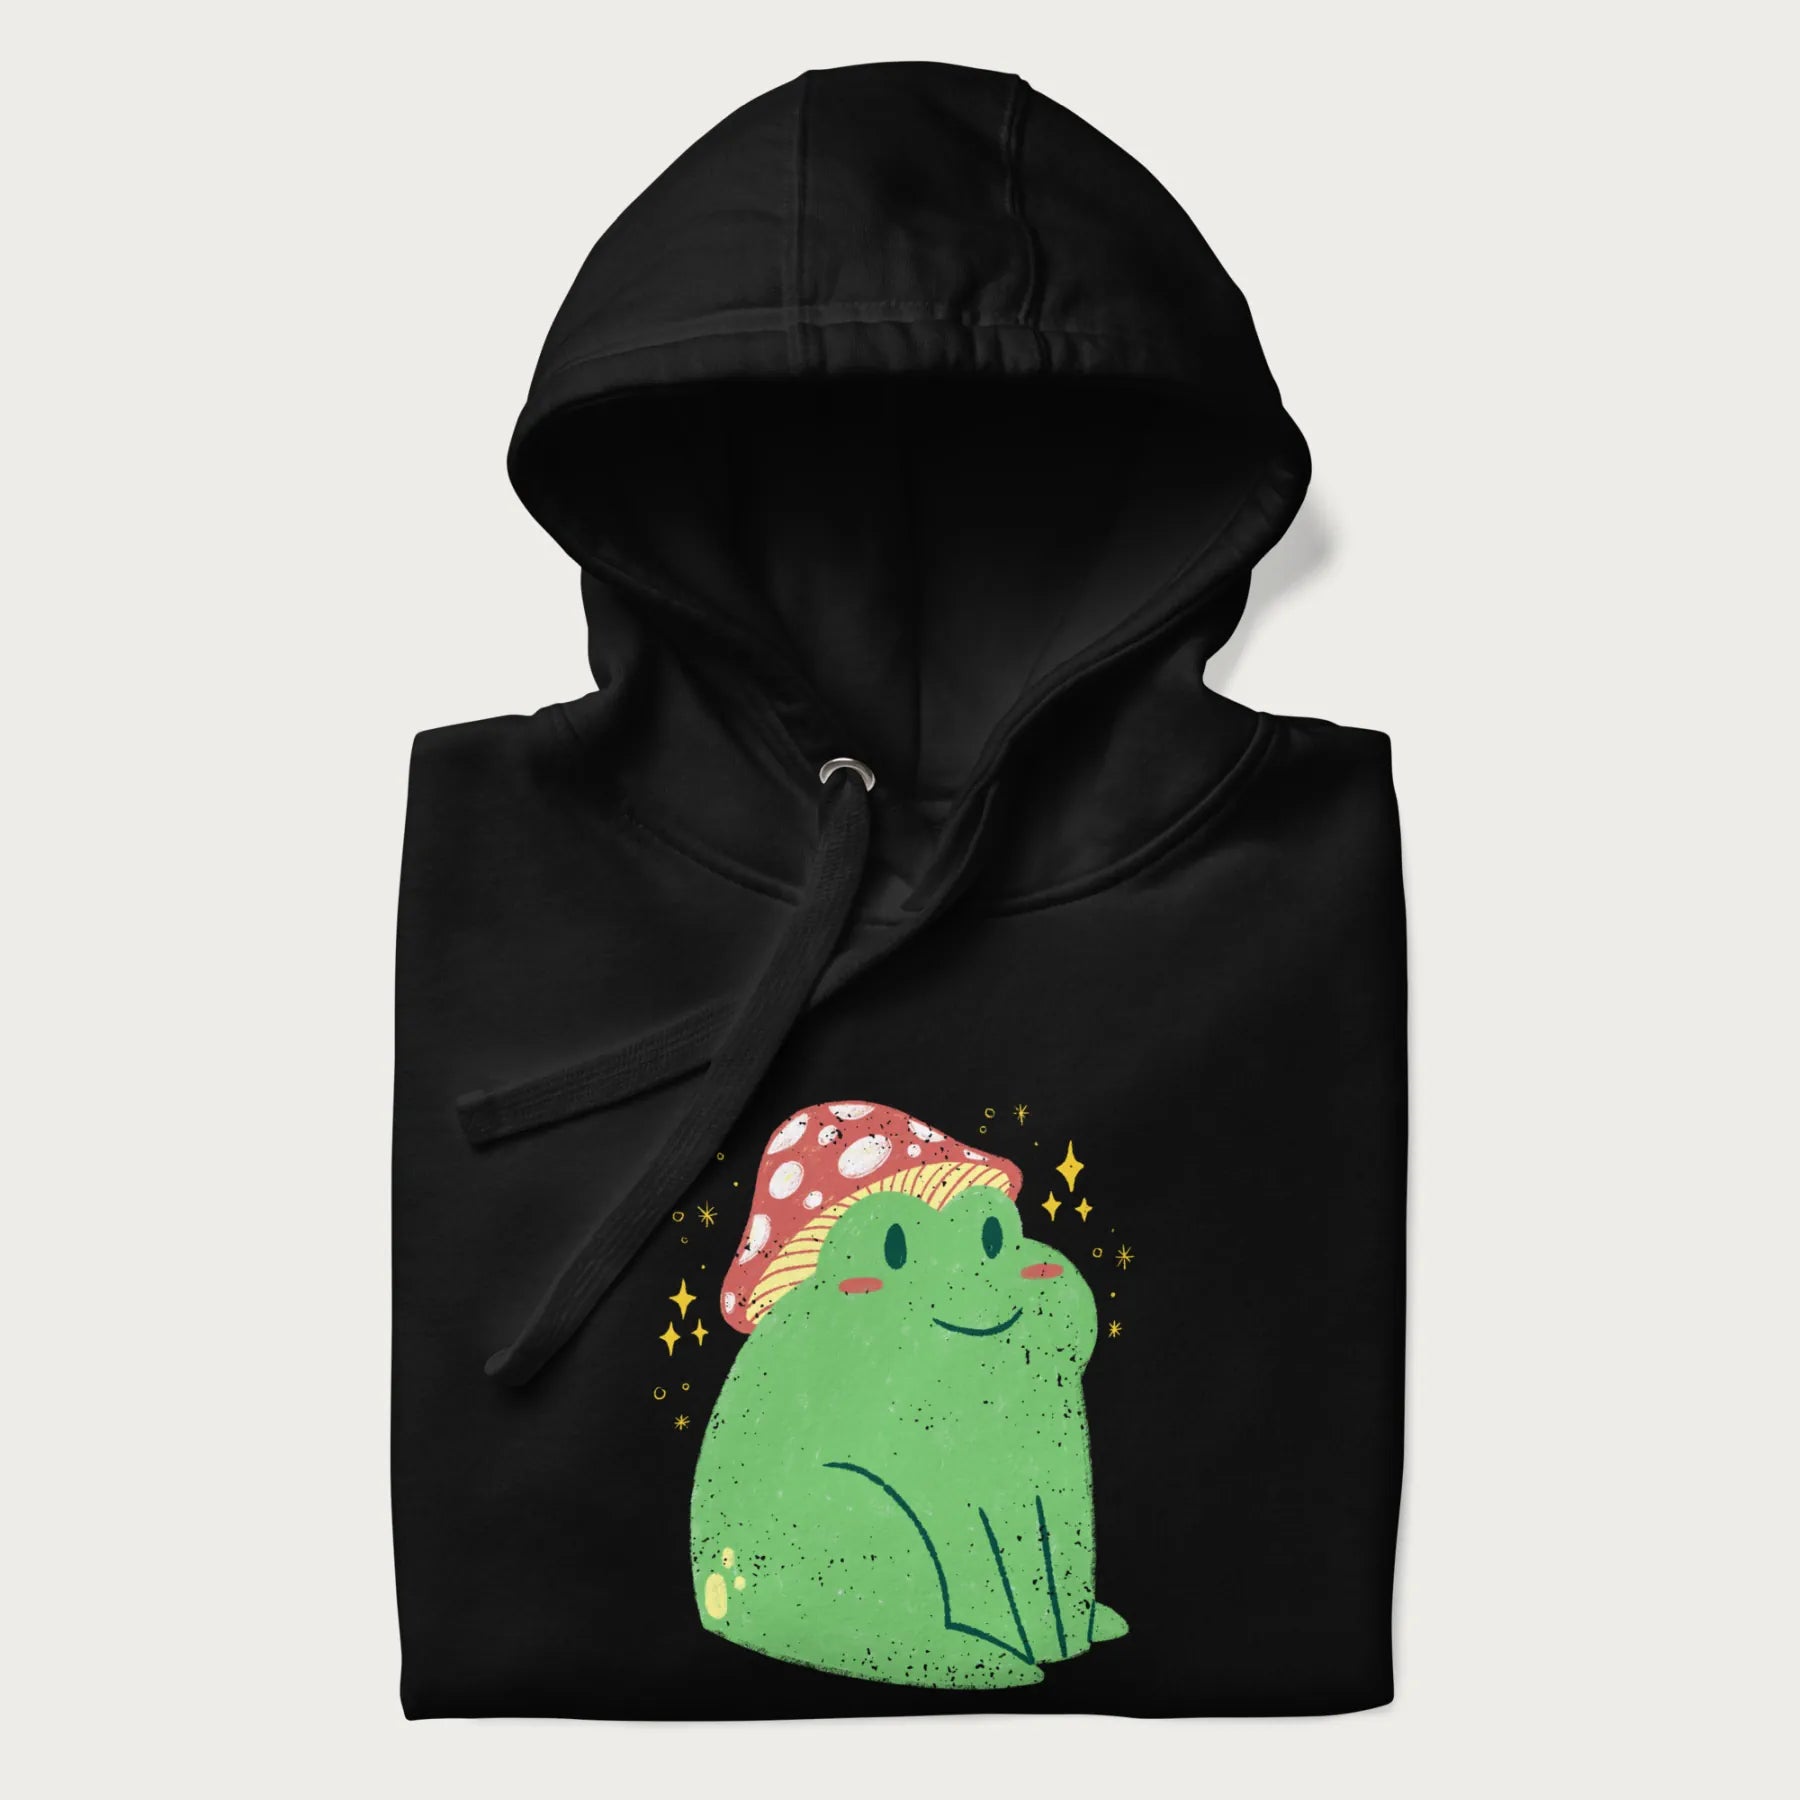 Folded black hoodie with a graphic of a green frog wearing a mushroom cap surrounded by stars.